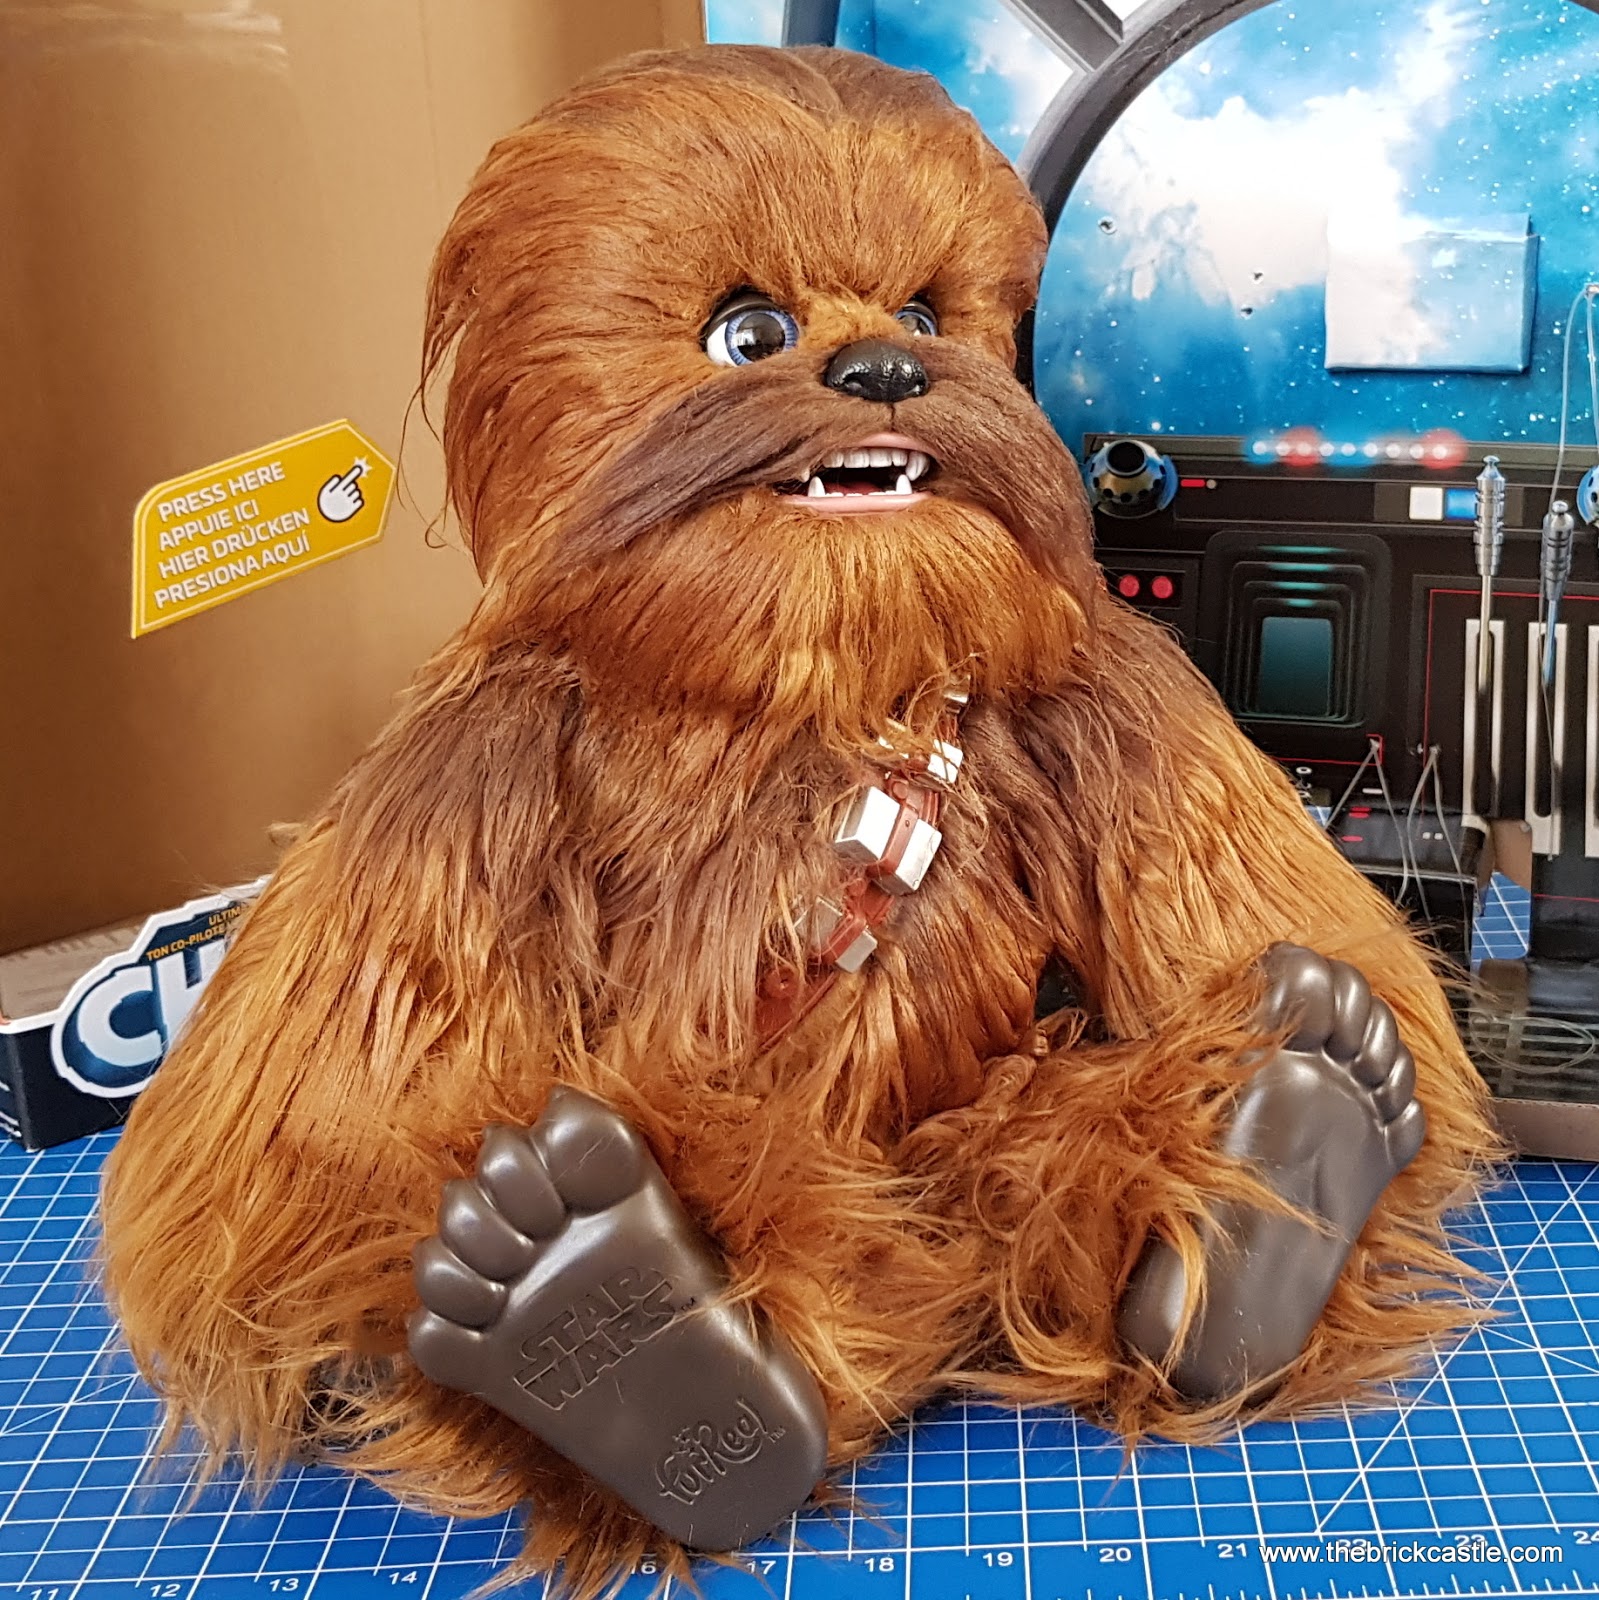 The Brick Castle: Star Wars Ultimate Co-pilot Chewie Interactive 